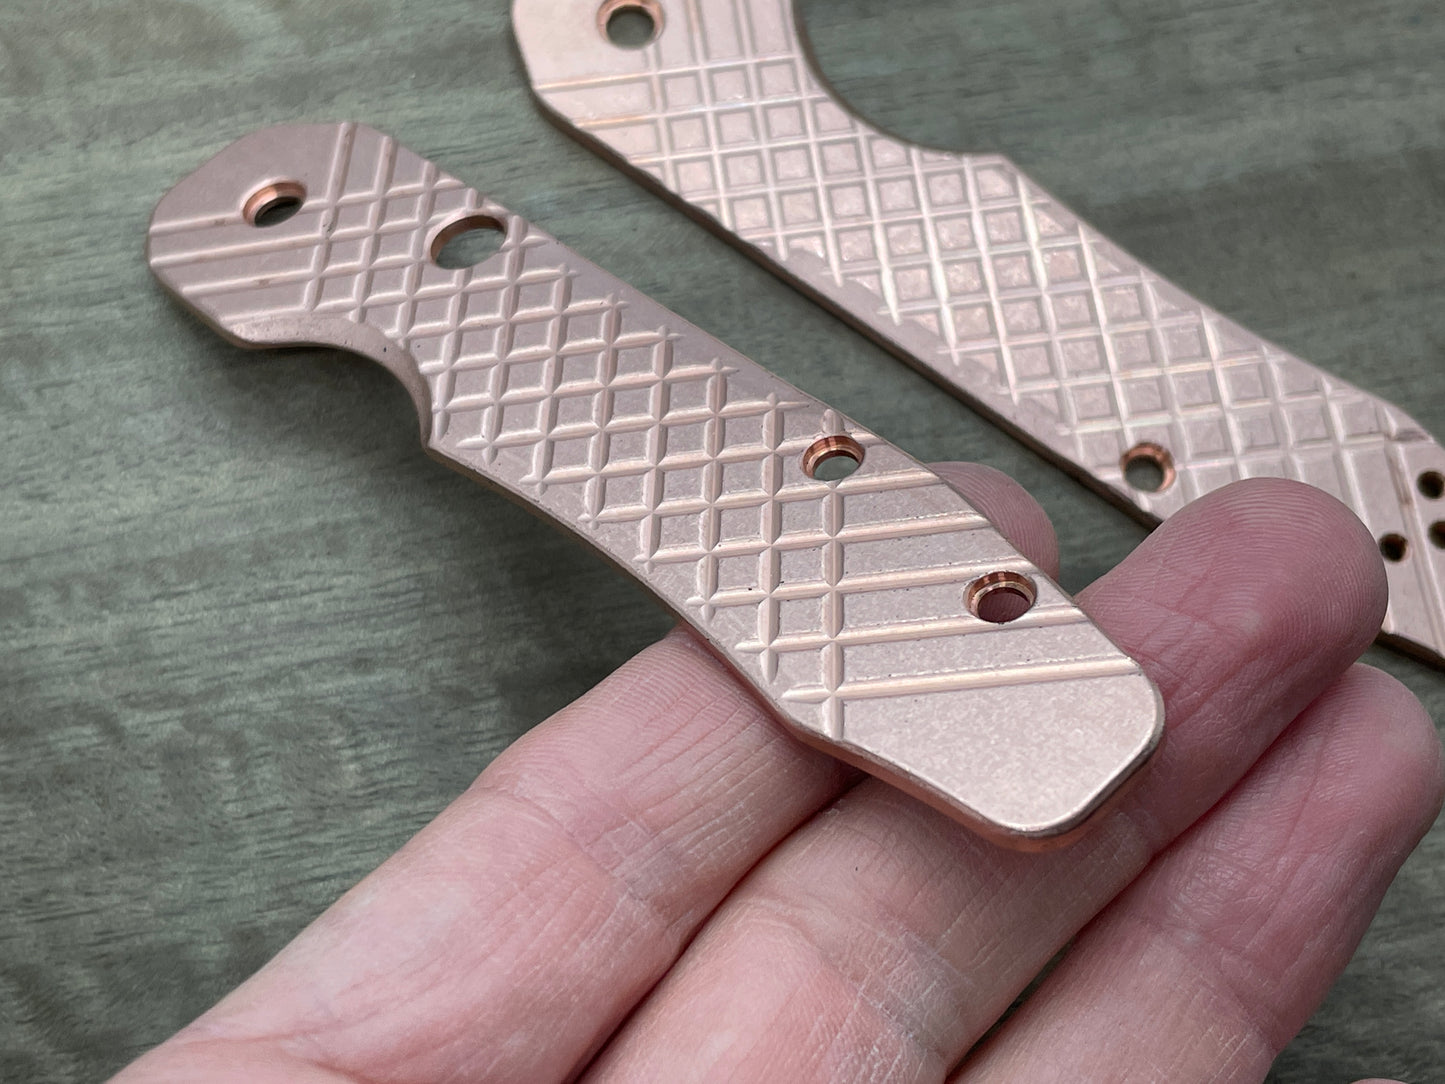 FRAG Cnc milled Tumbled Copper Scales for Spyderco SMOCK